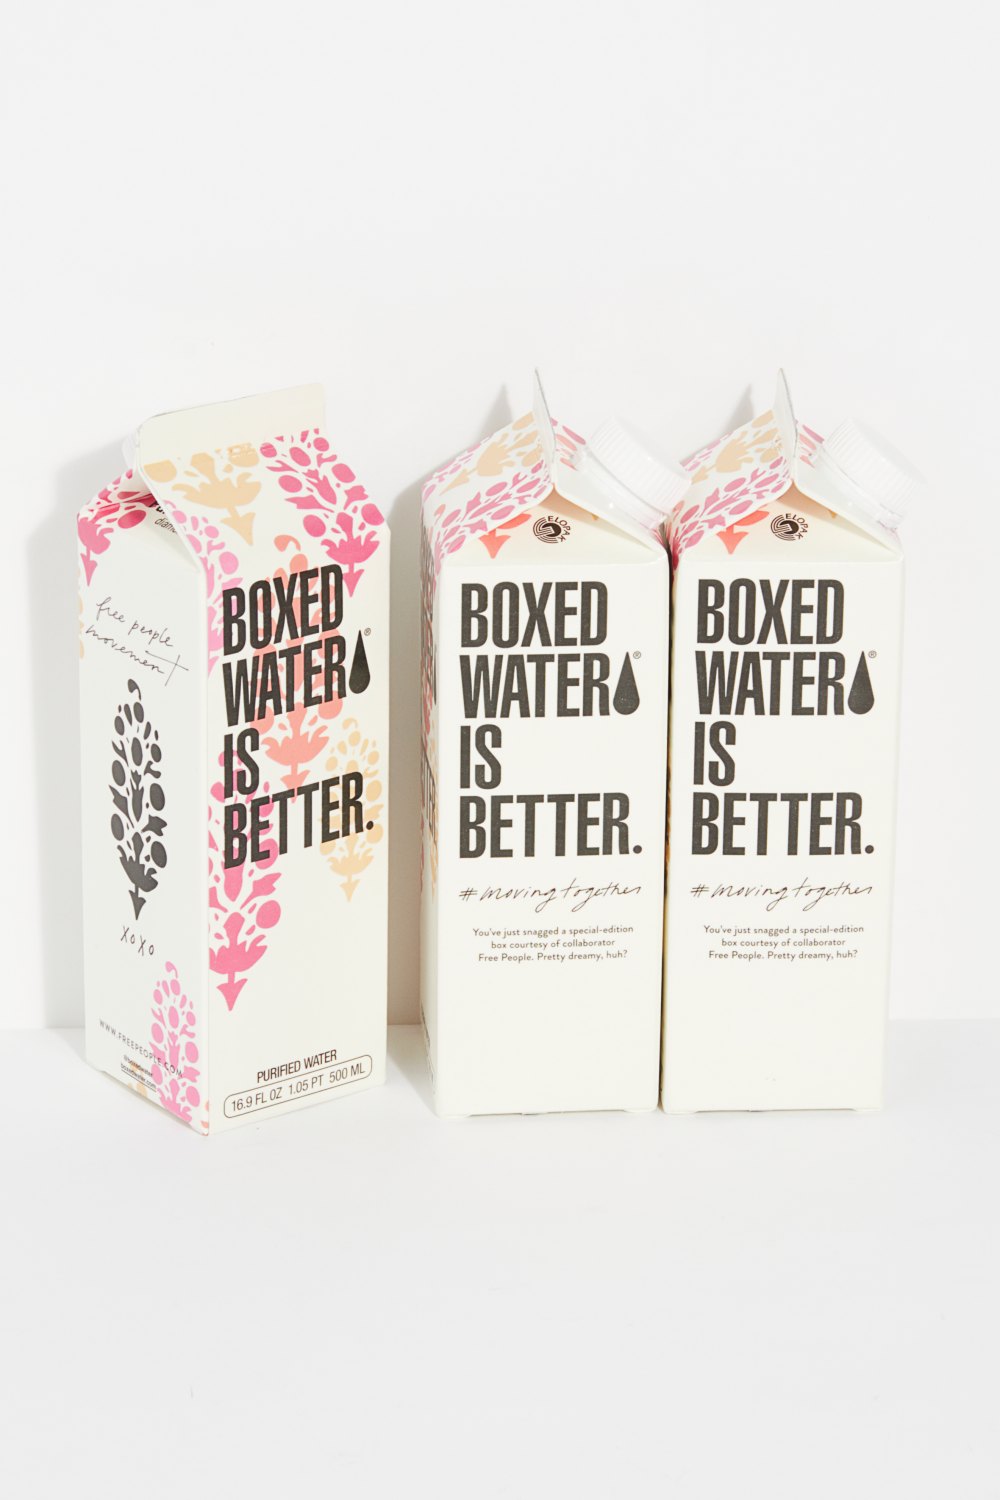 Free People x Boxed Water